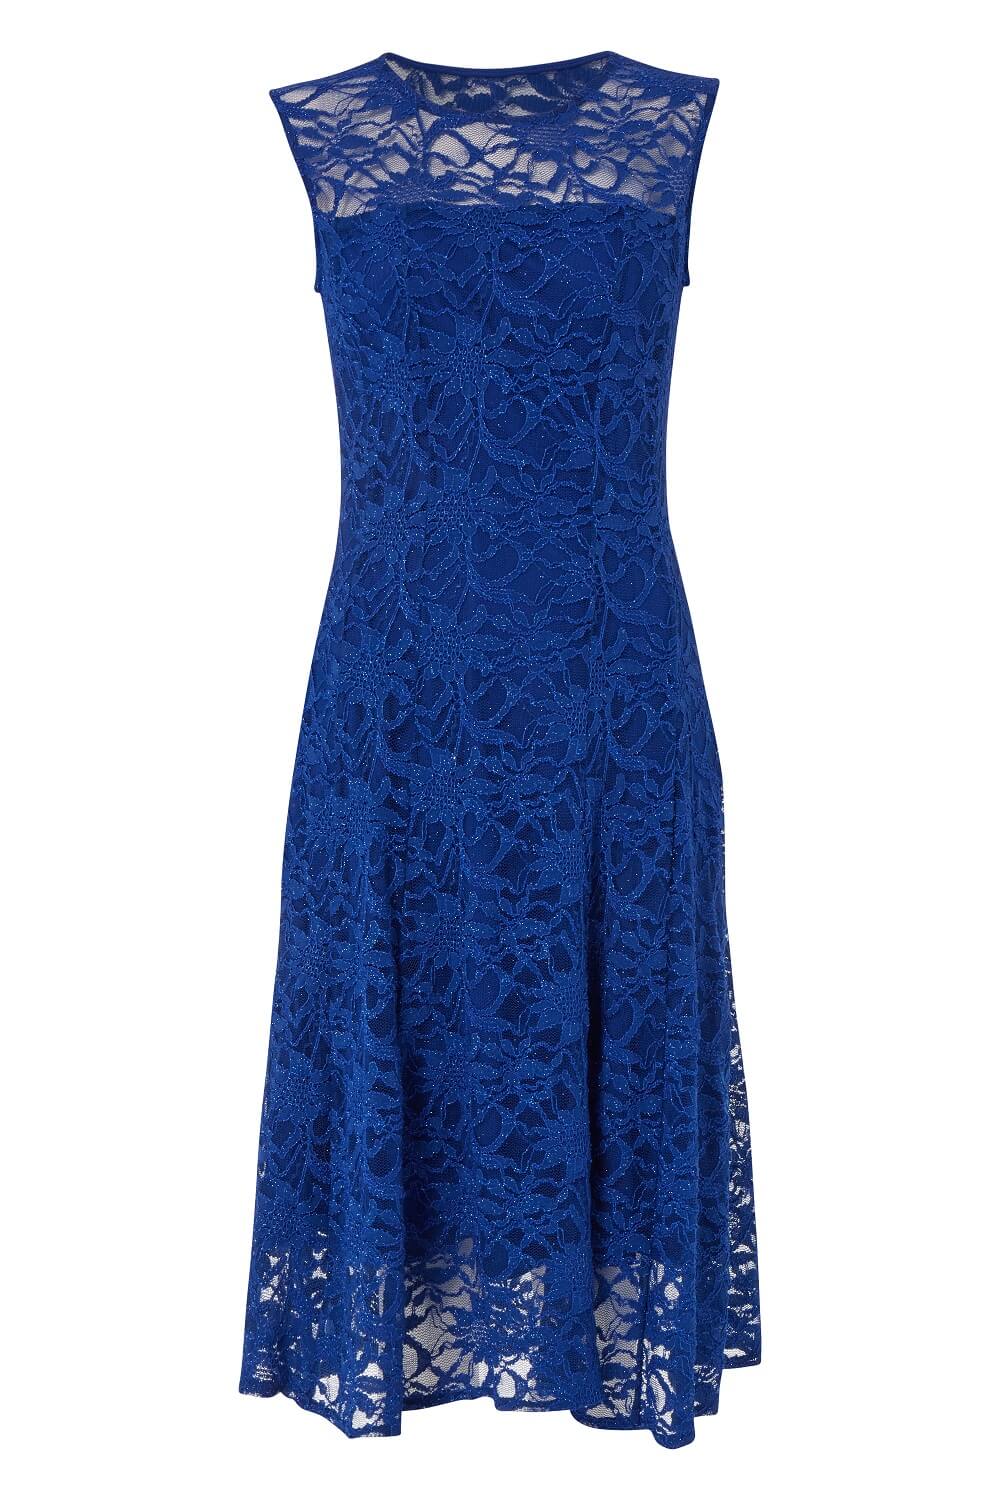 Royal Blue Glitter Lace Fit and Flare Dress, Image 5 of 5